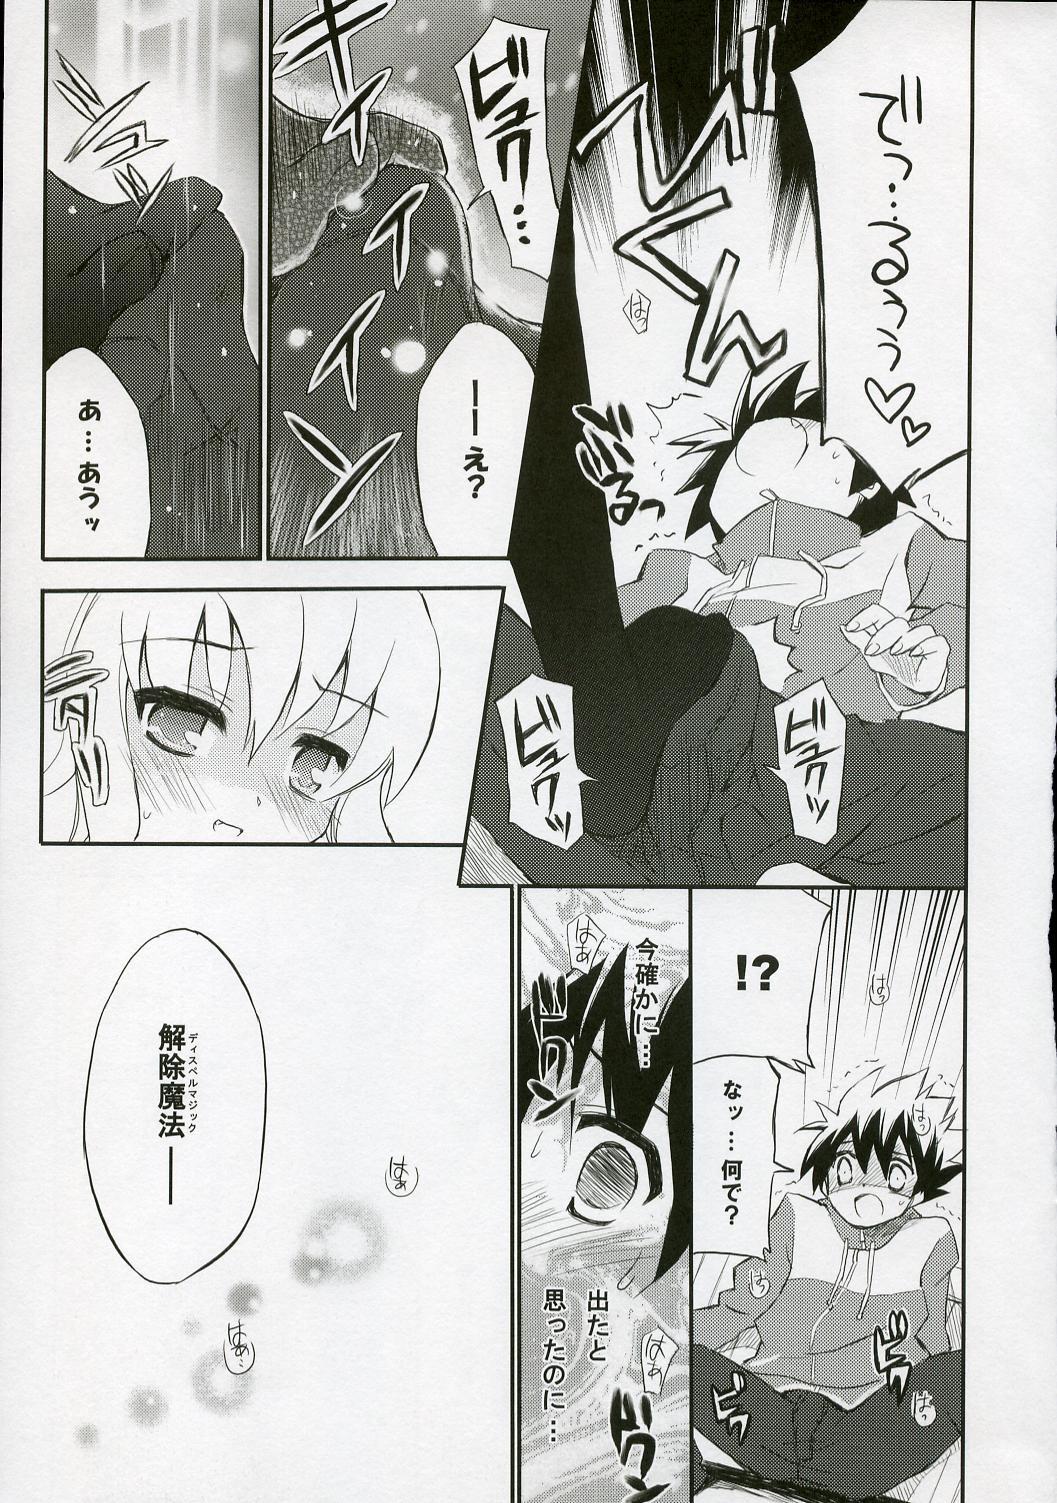 Redbone BS#12 Louise to Mata Asobo - Let's Play with Louise Again - Zero no tsukaima Danish - Page 8